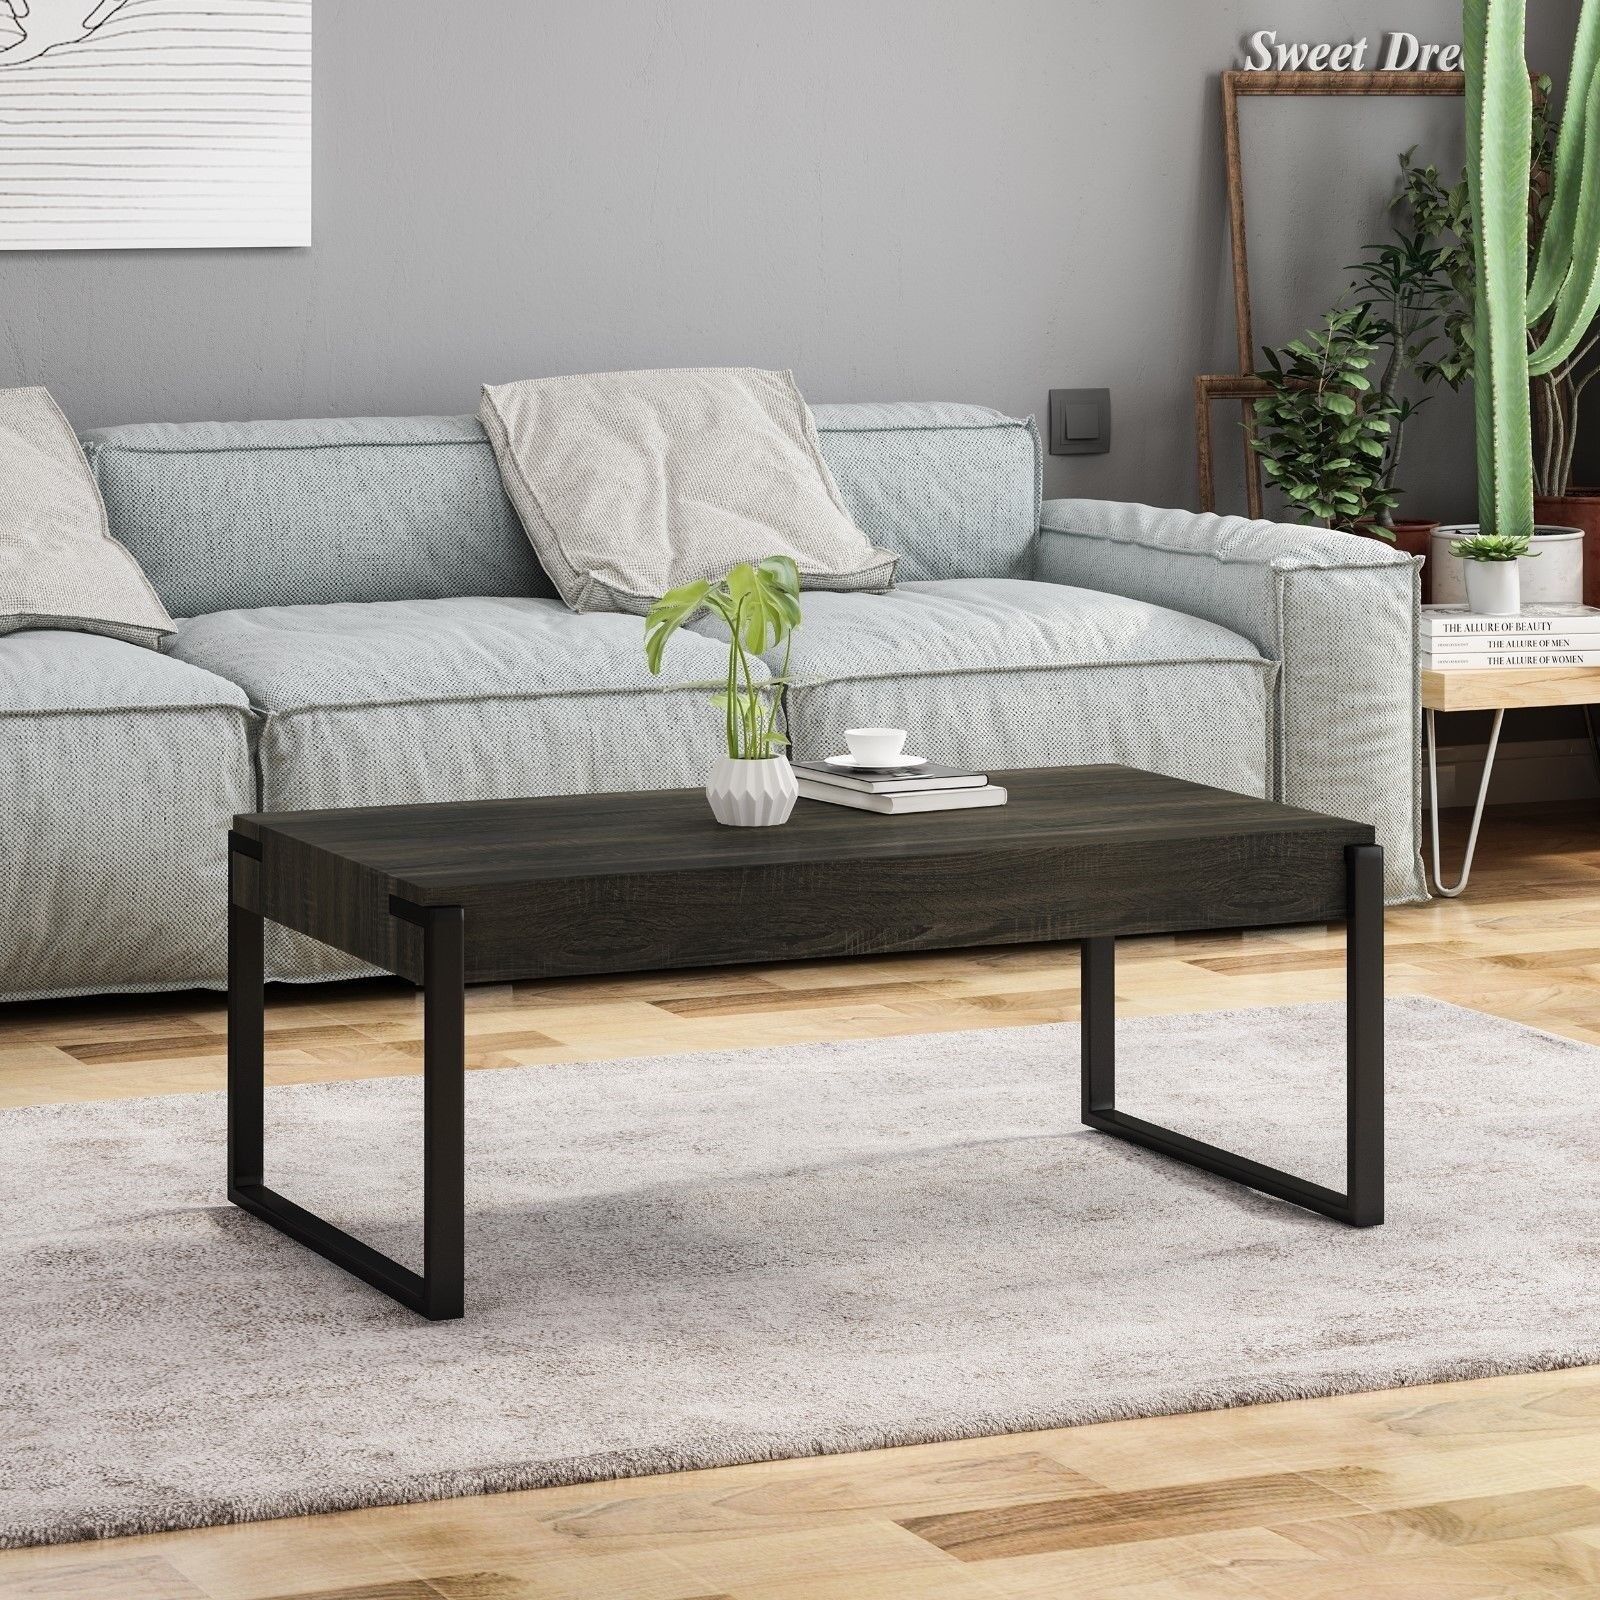 Shaw Modern Contemporary Industrial Faux Wood Coffee Table With Iron Legs |  Ebay With Faux Wood Coffee Tables (View 9 of 15)